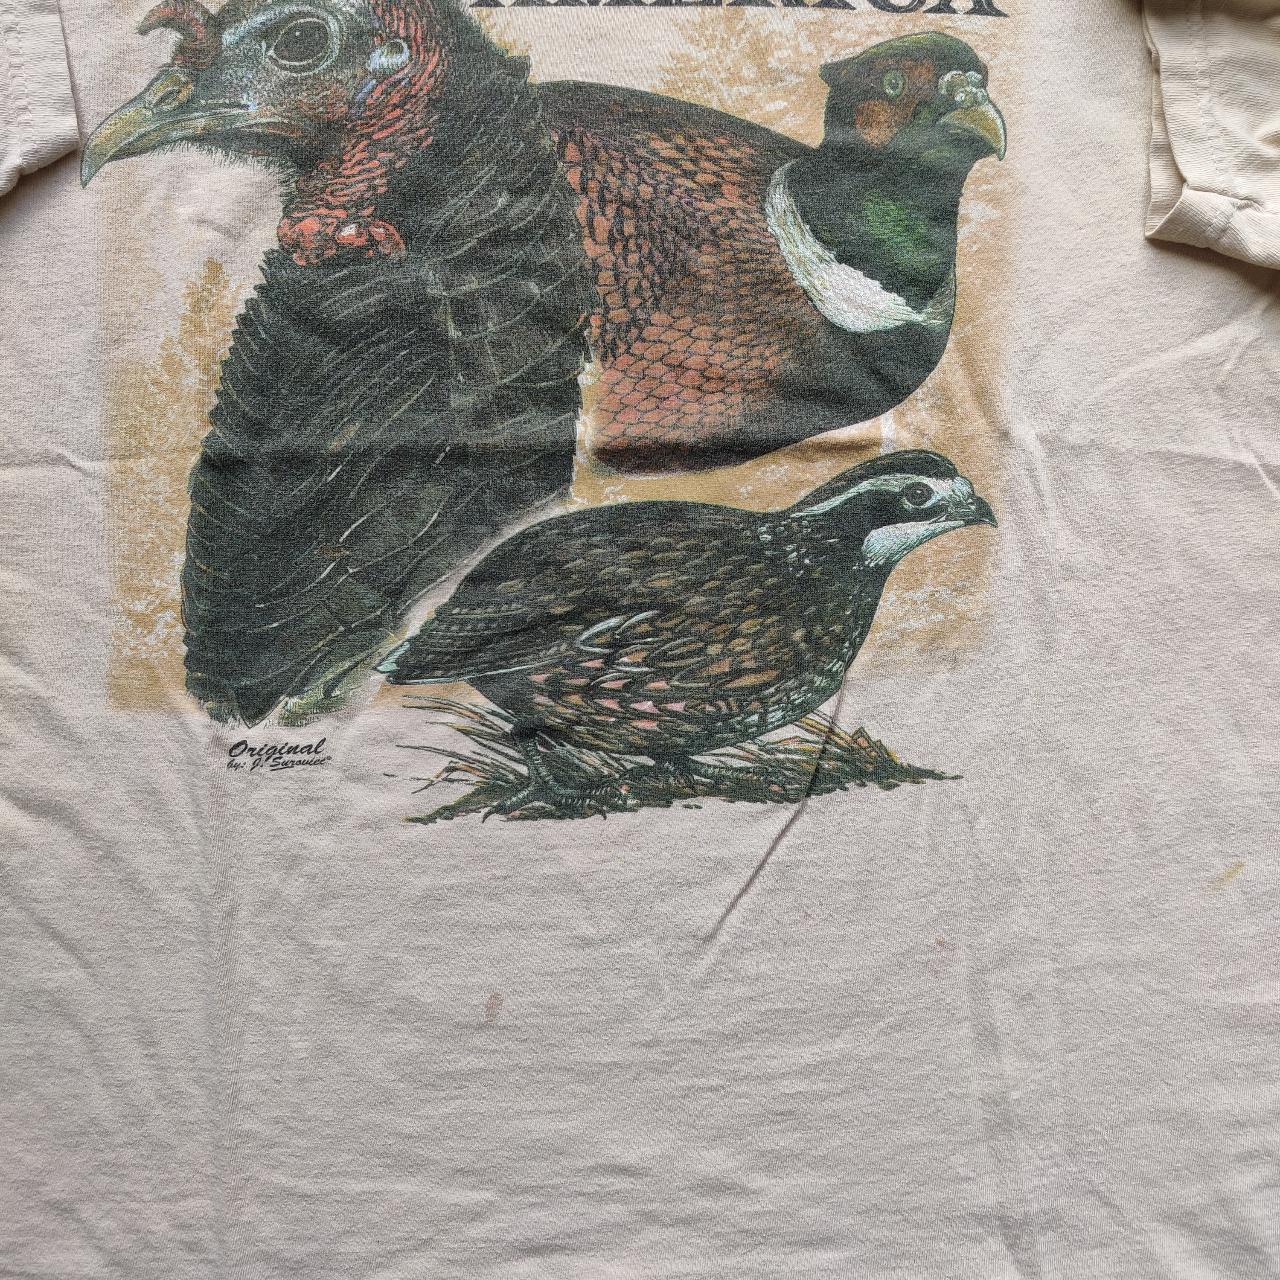 Product Image 2 - Vintage Outback America T-Shirt
Used in